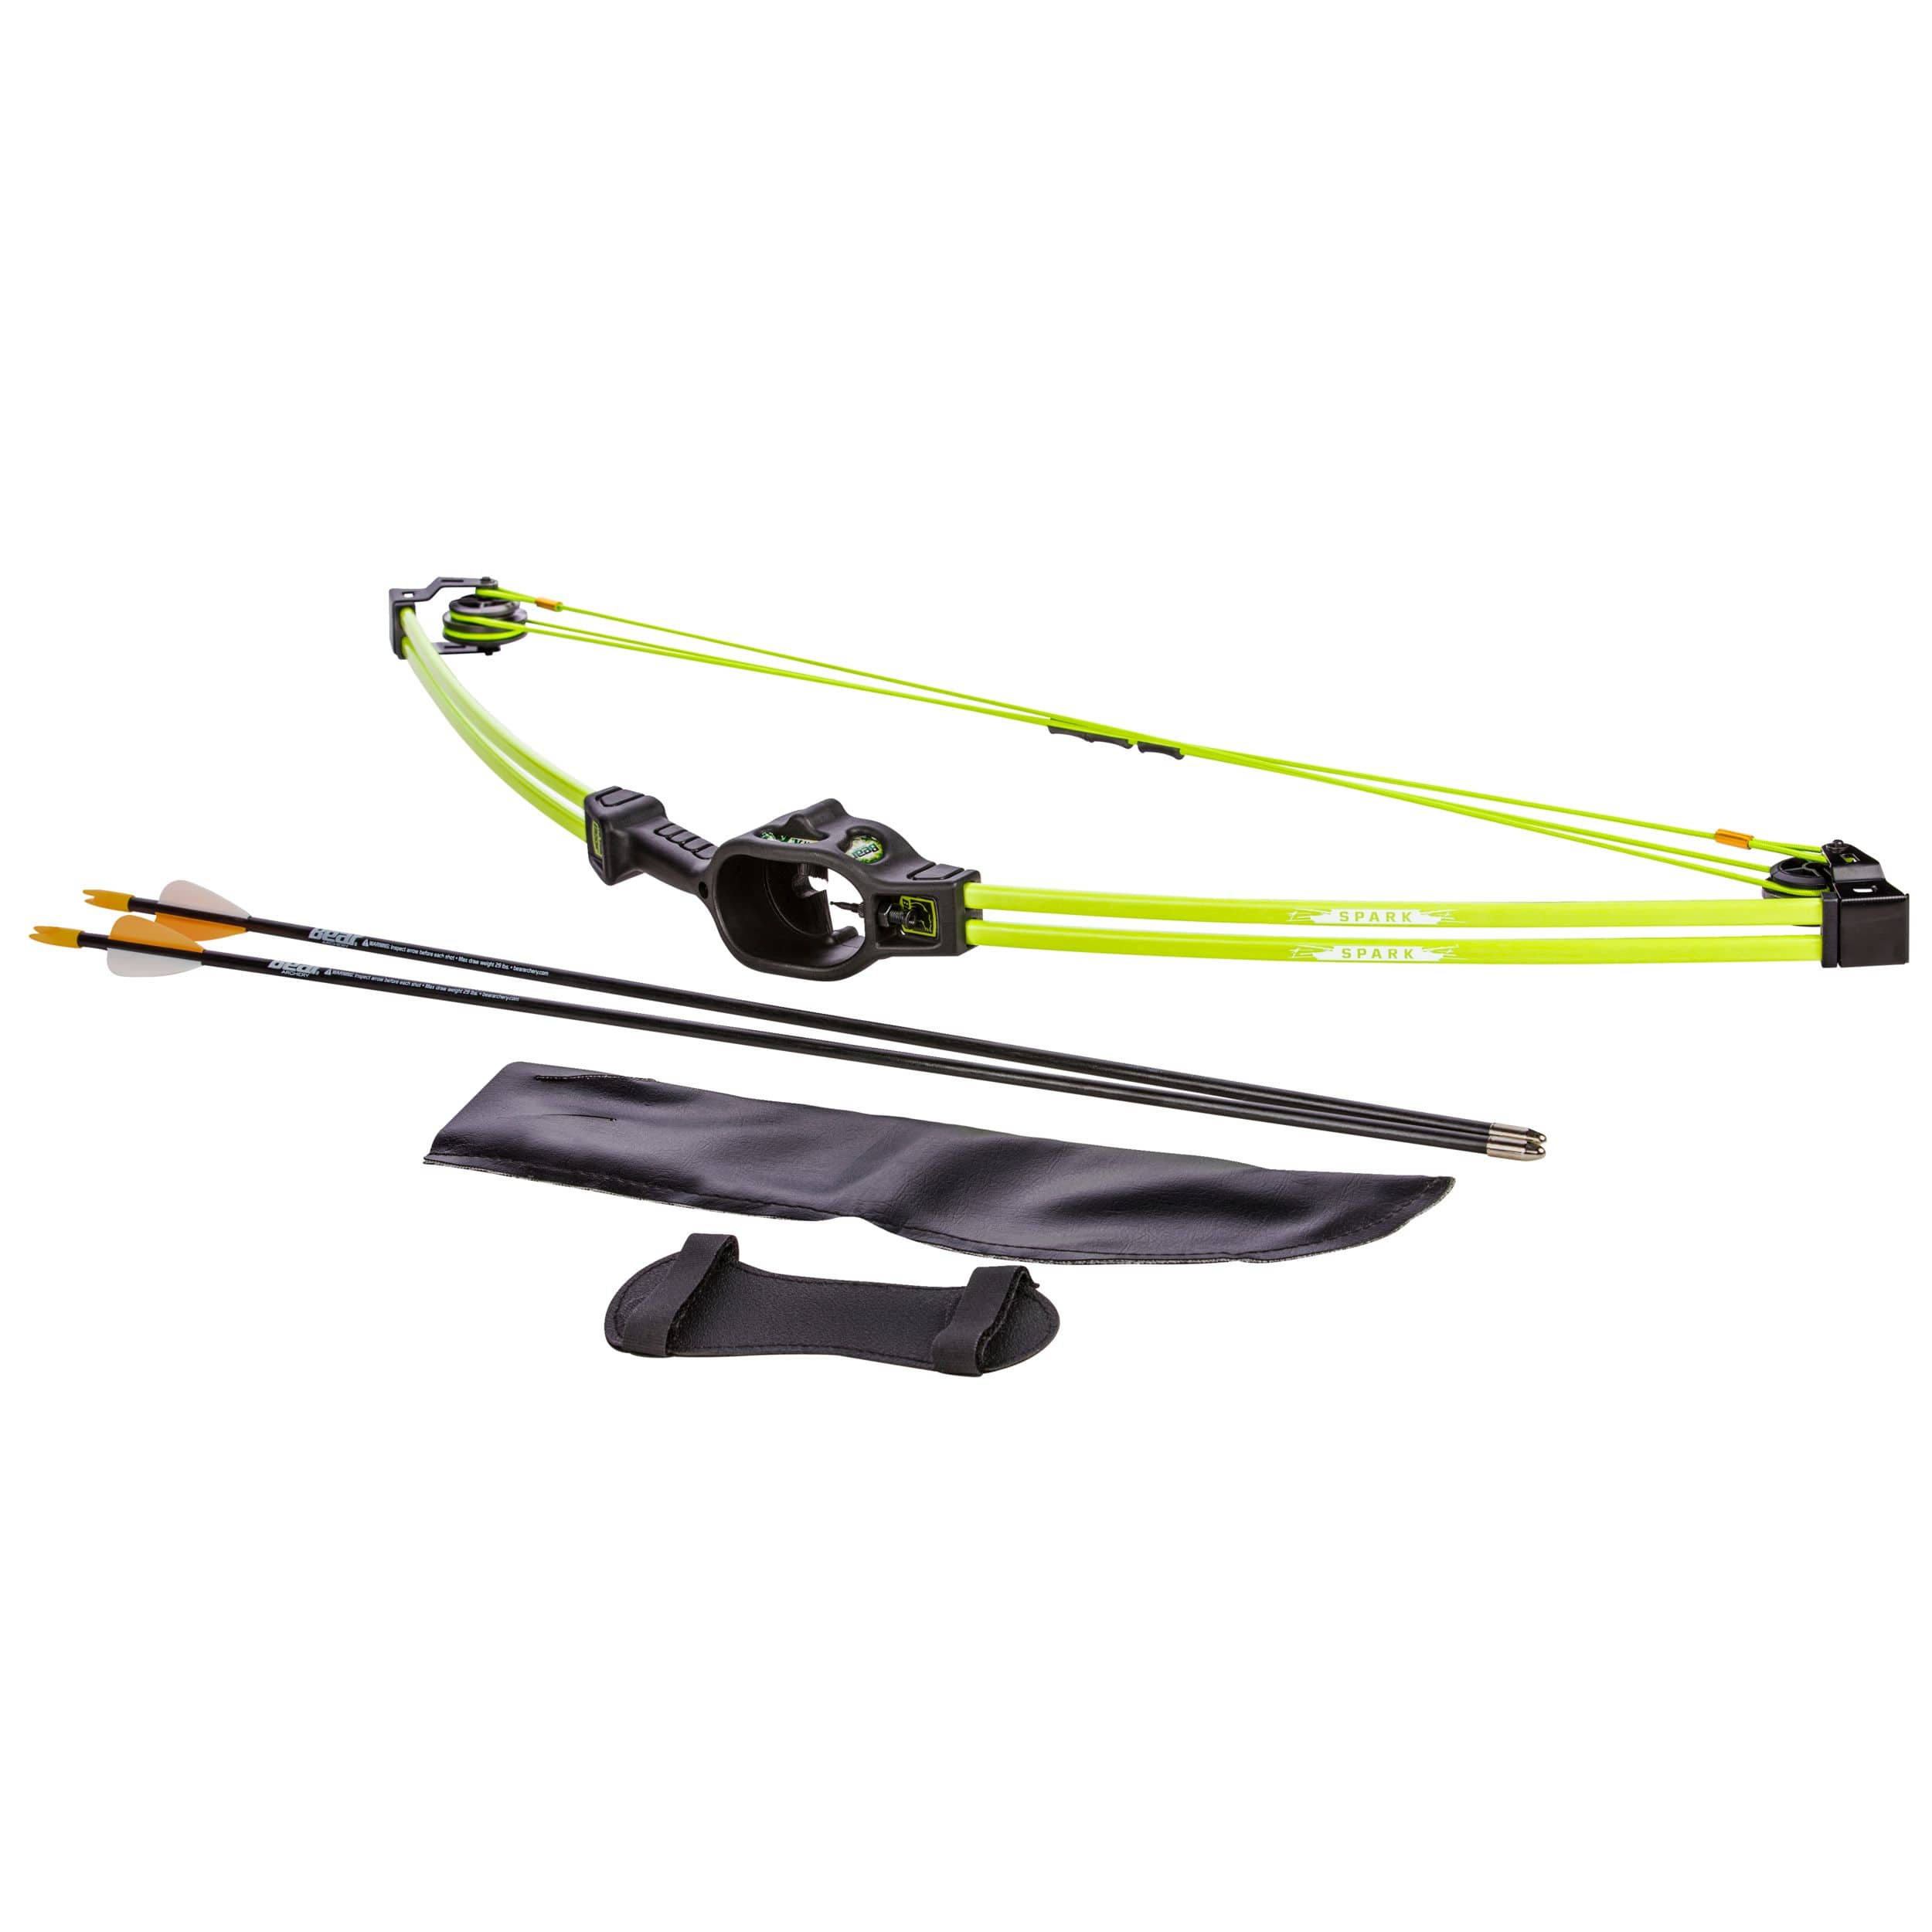 Bear Archery Spark Youth Bow Package, 5-10 lbs Draw, Ages 5+